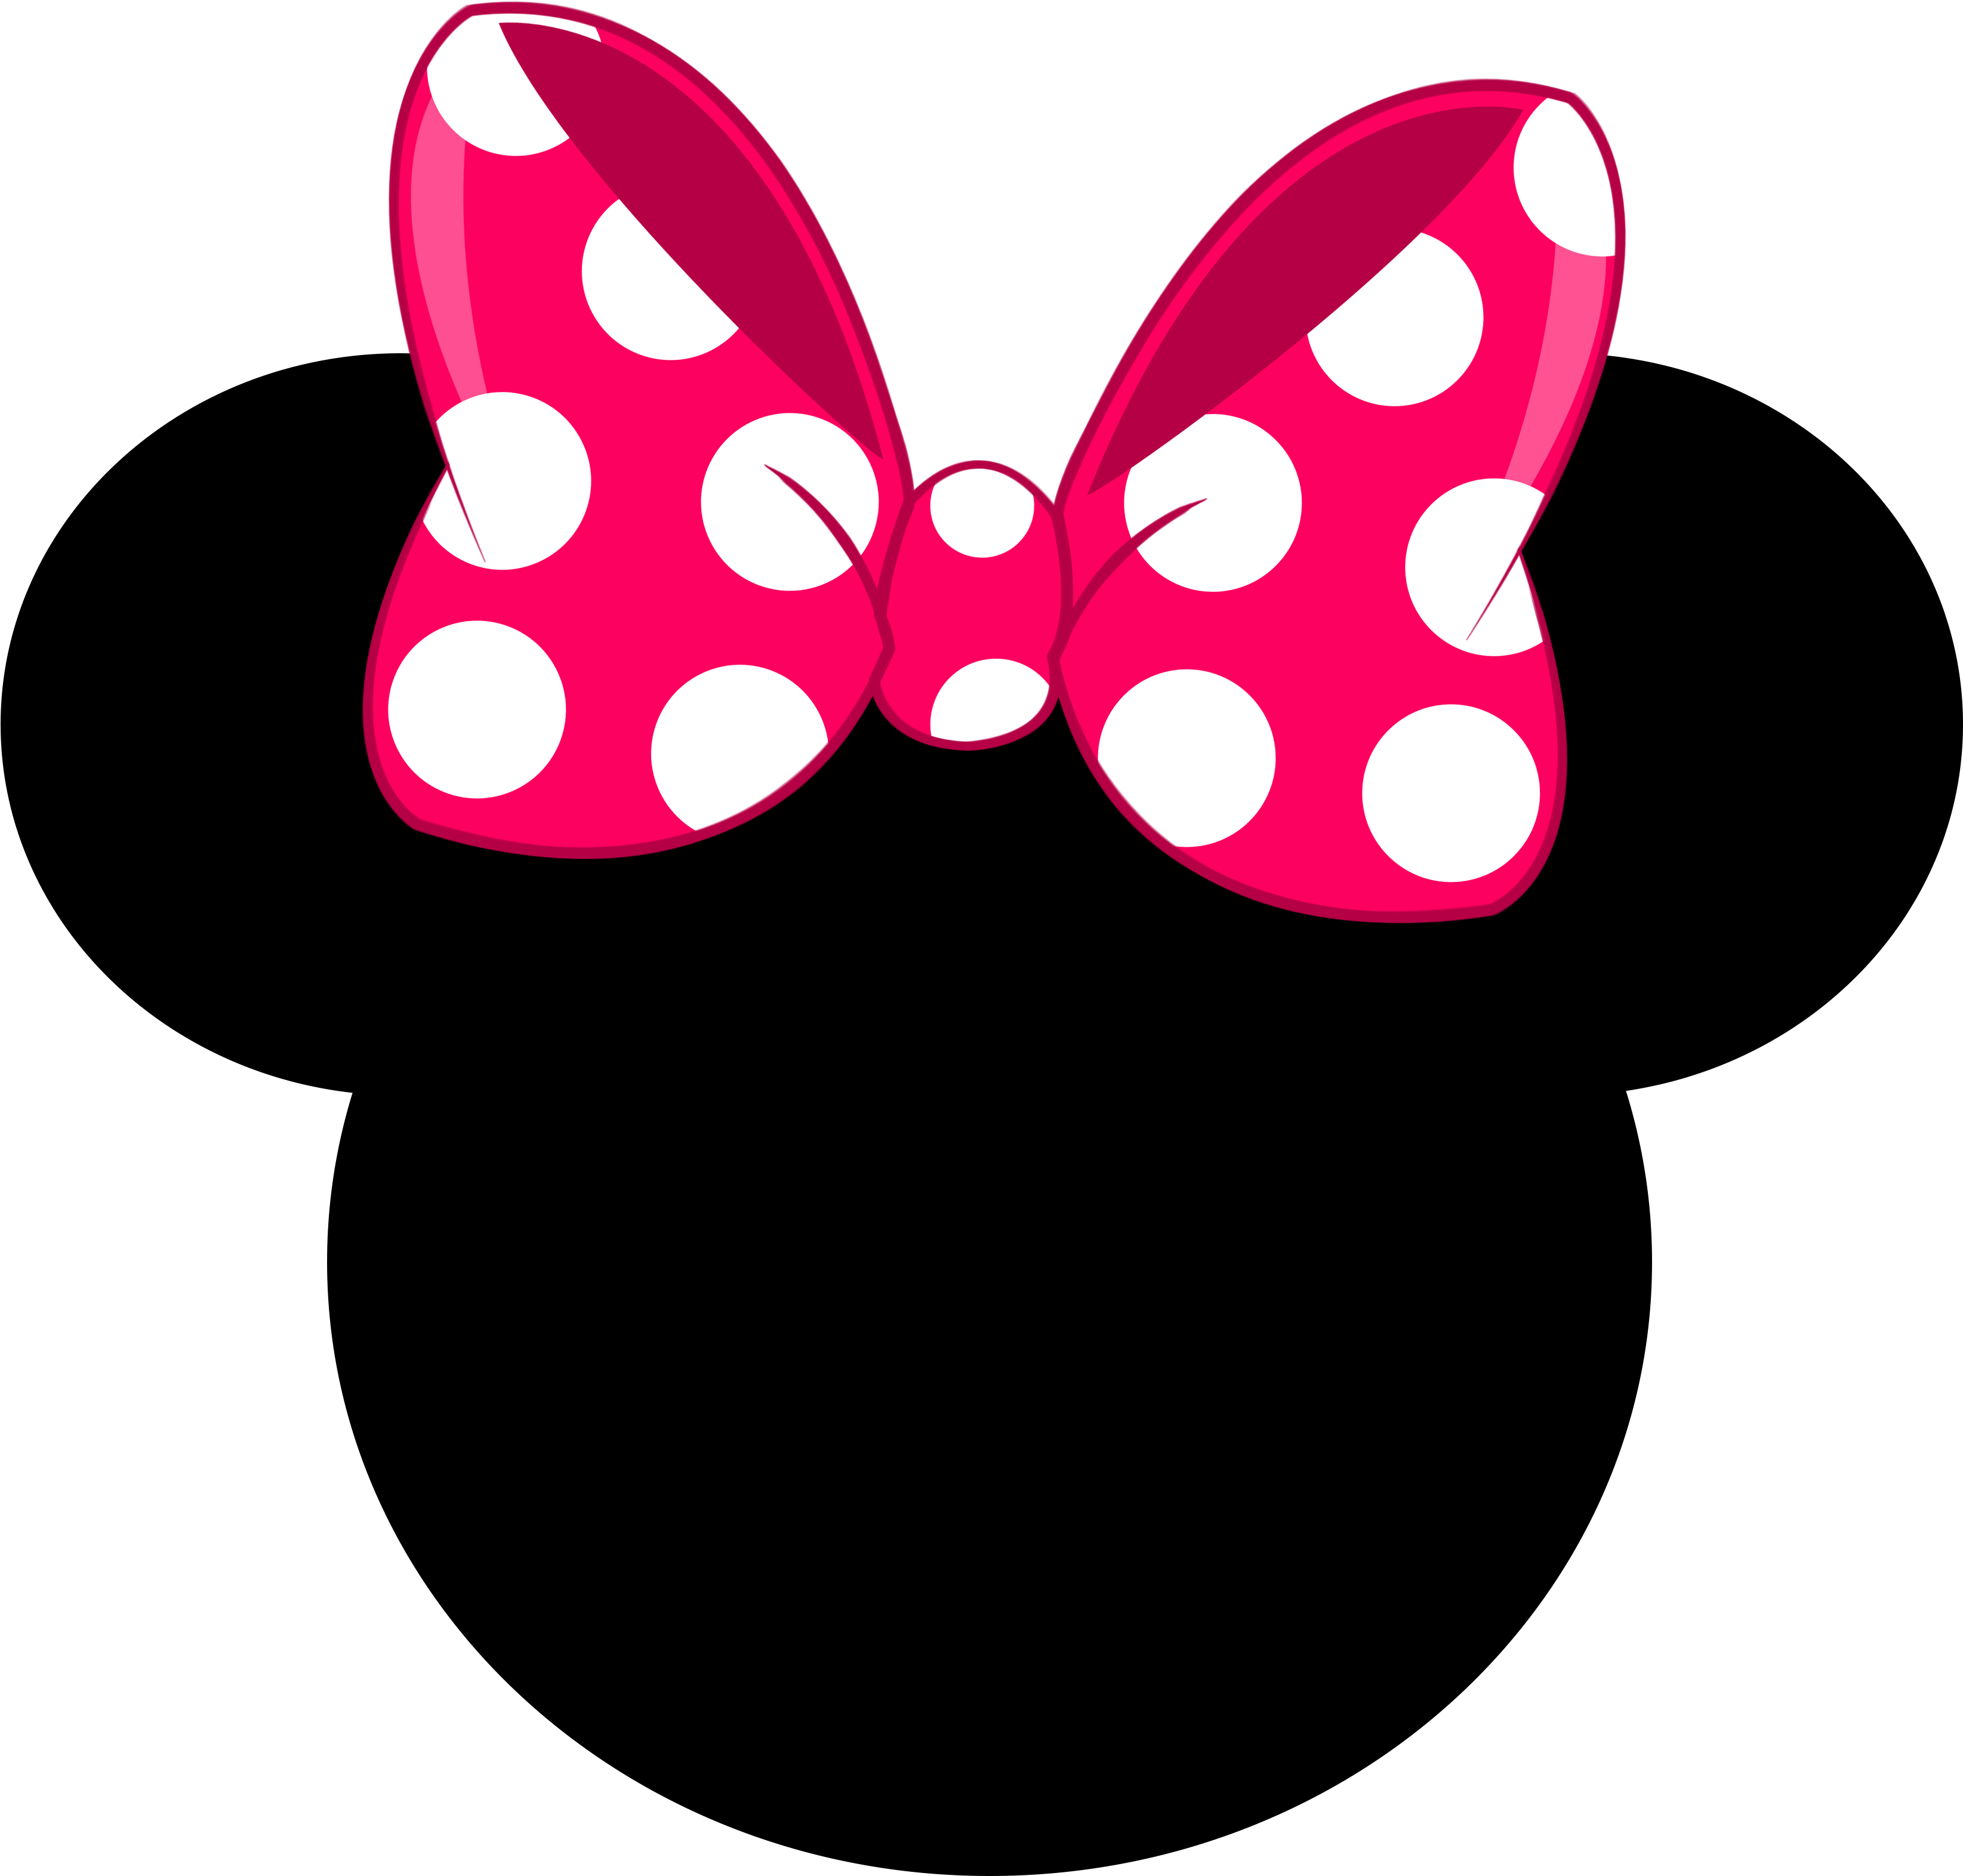 Free Minnie Mouse Ears Png, Download Free Clip Art, Free